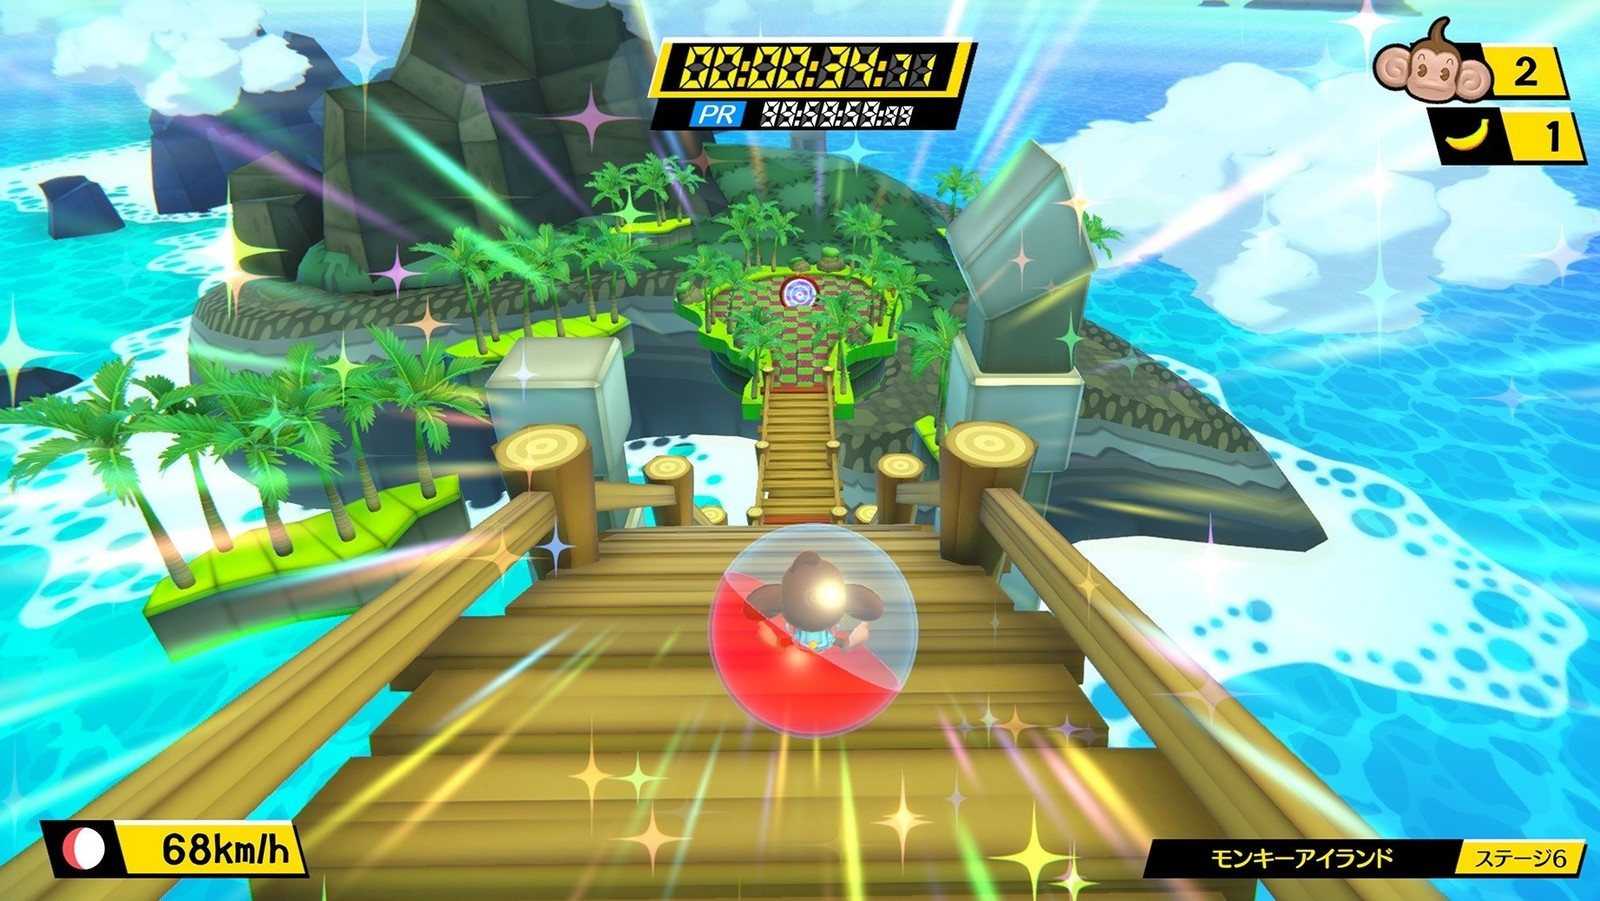 Super Monkey Ball Gets Announced For PC, Switch, PS4 And Xbox One